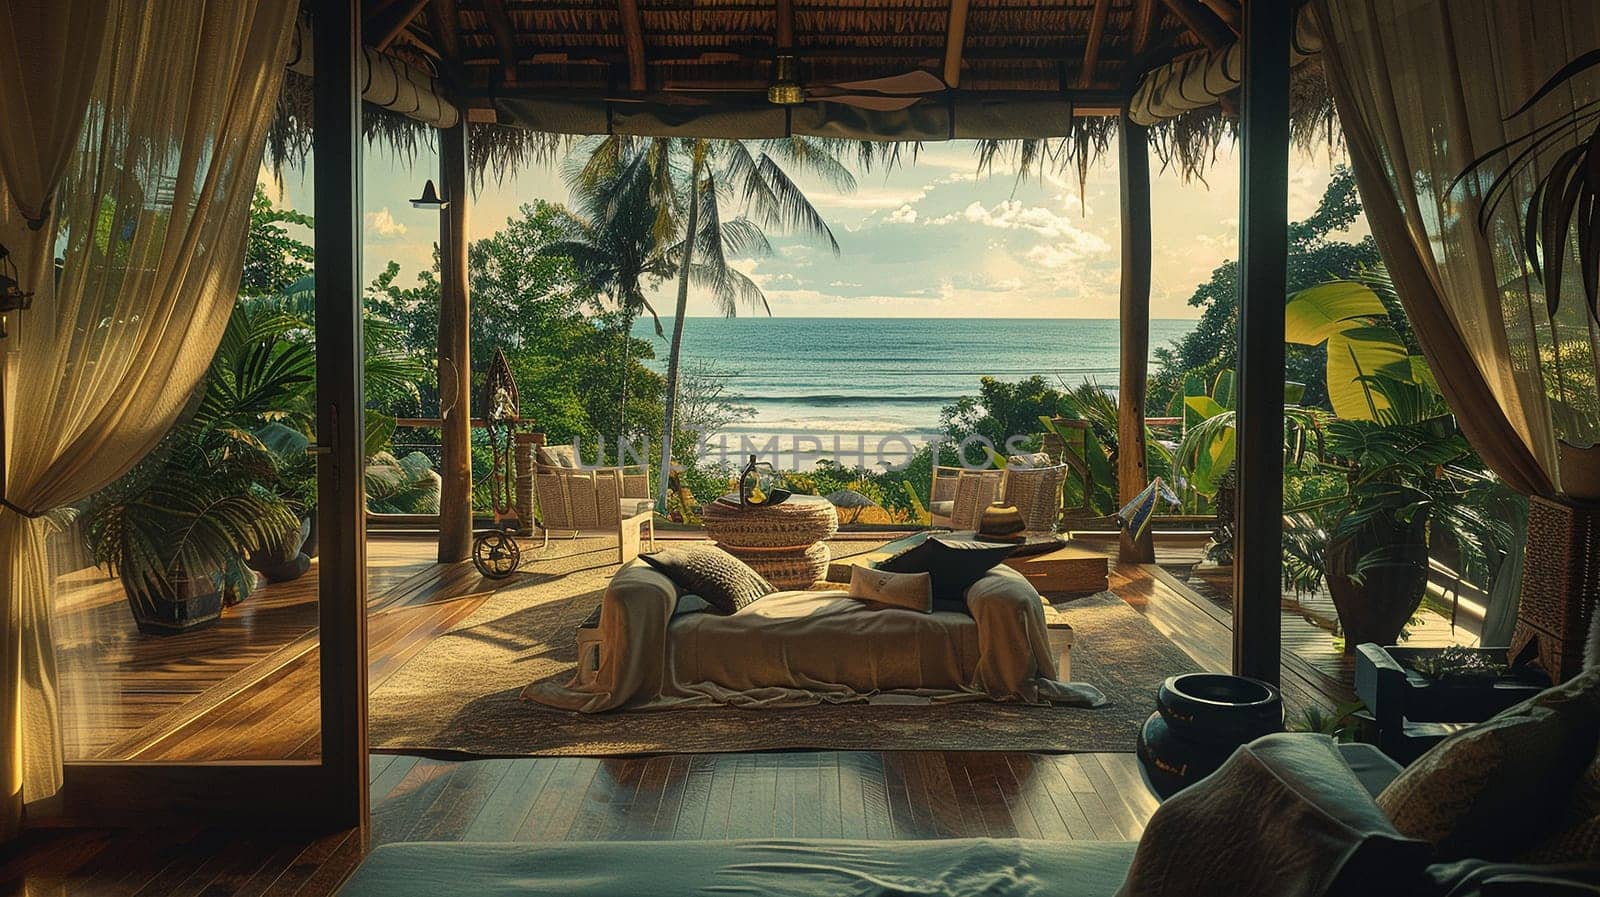 Beautiful beach interior scene of a luxury room by the sea. Recreation, chillout, nature by NeuroSky